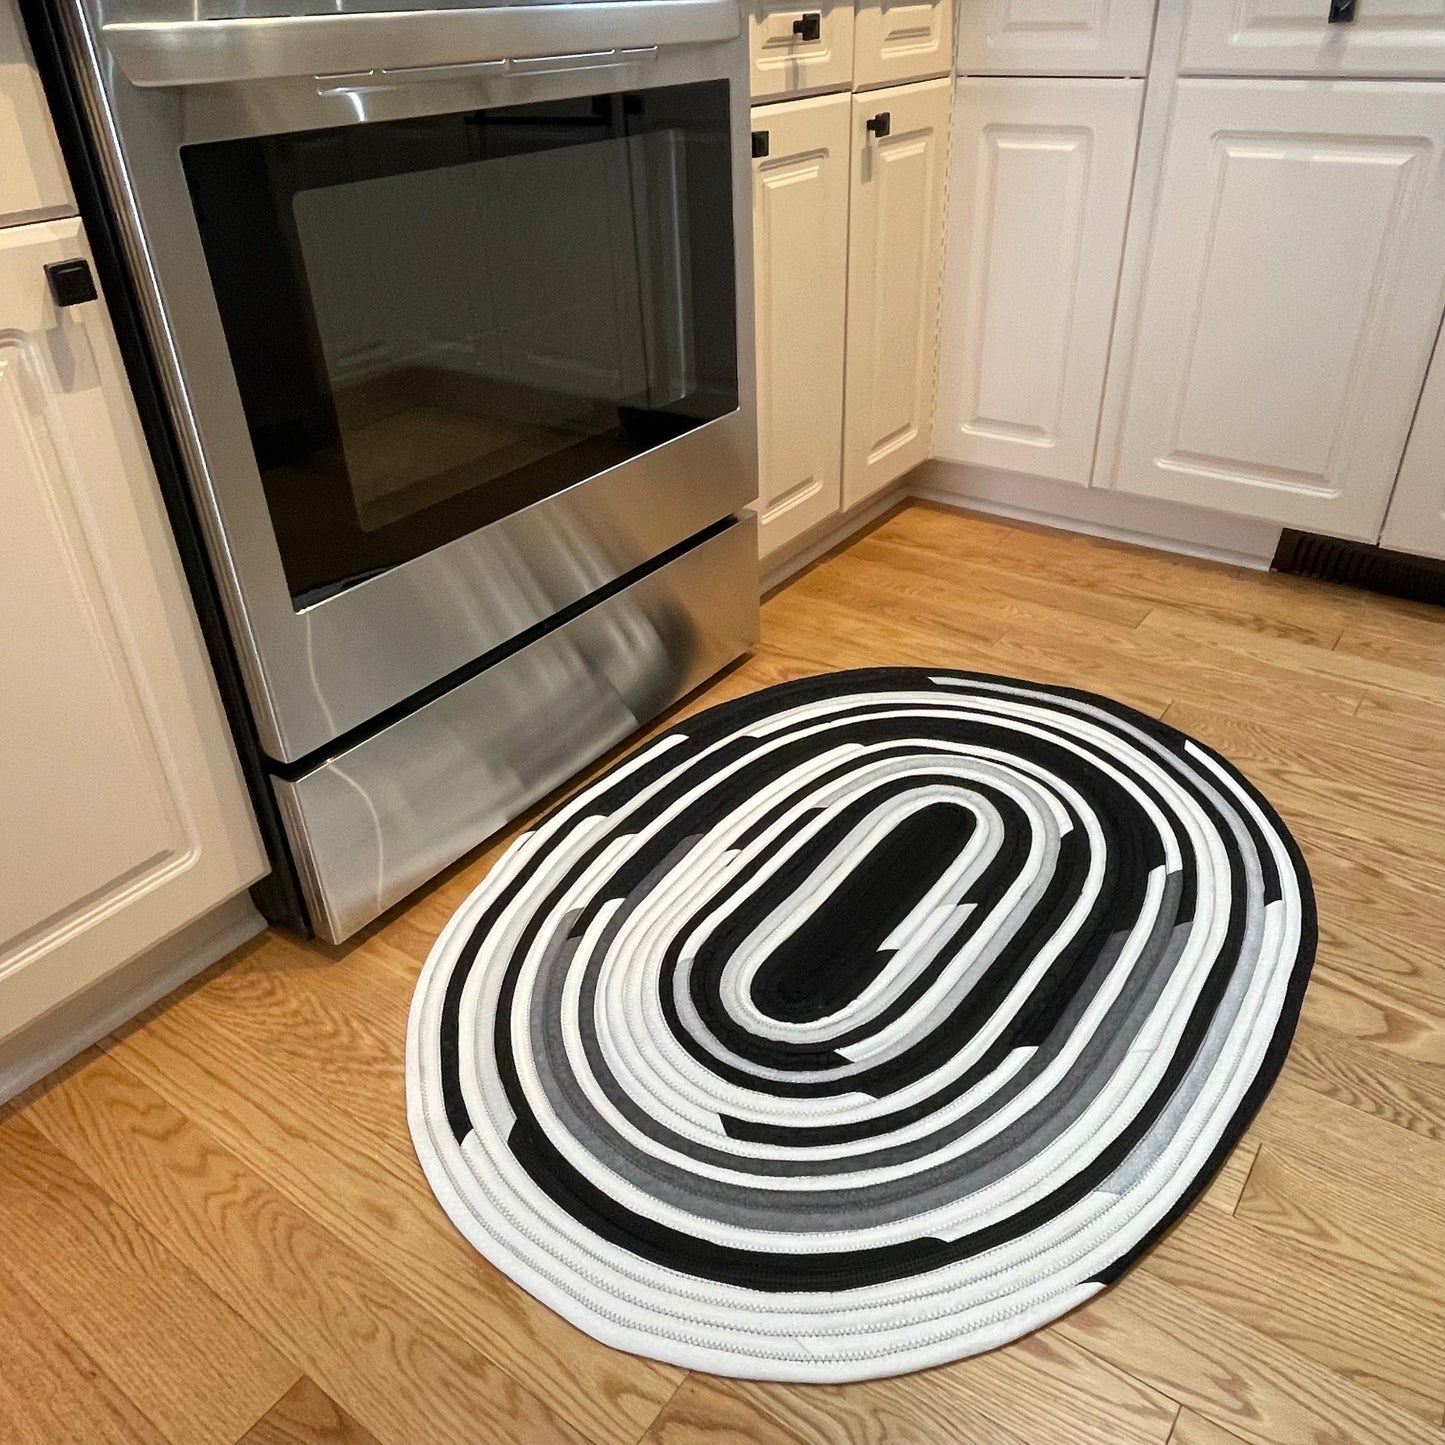 Black and White Kitchen Accent Rug Washable Cotton Rug For Bedside or Bathmat